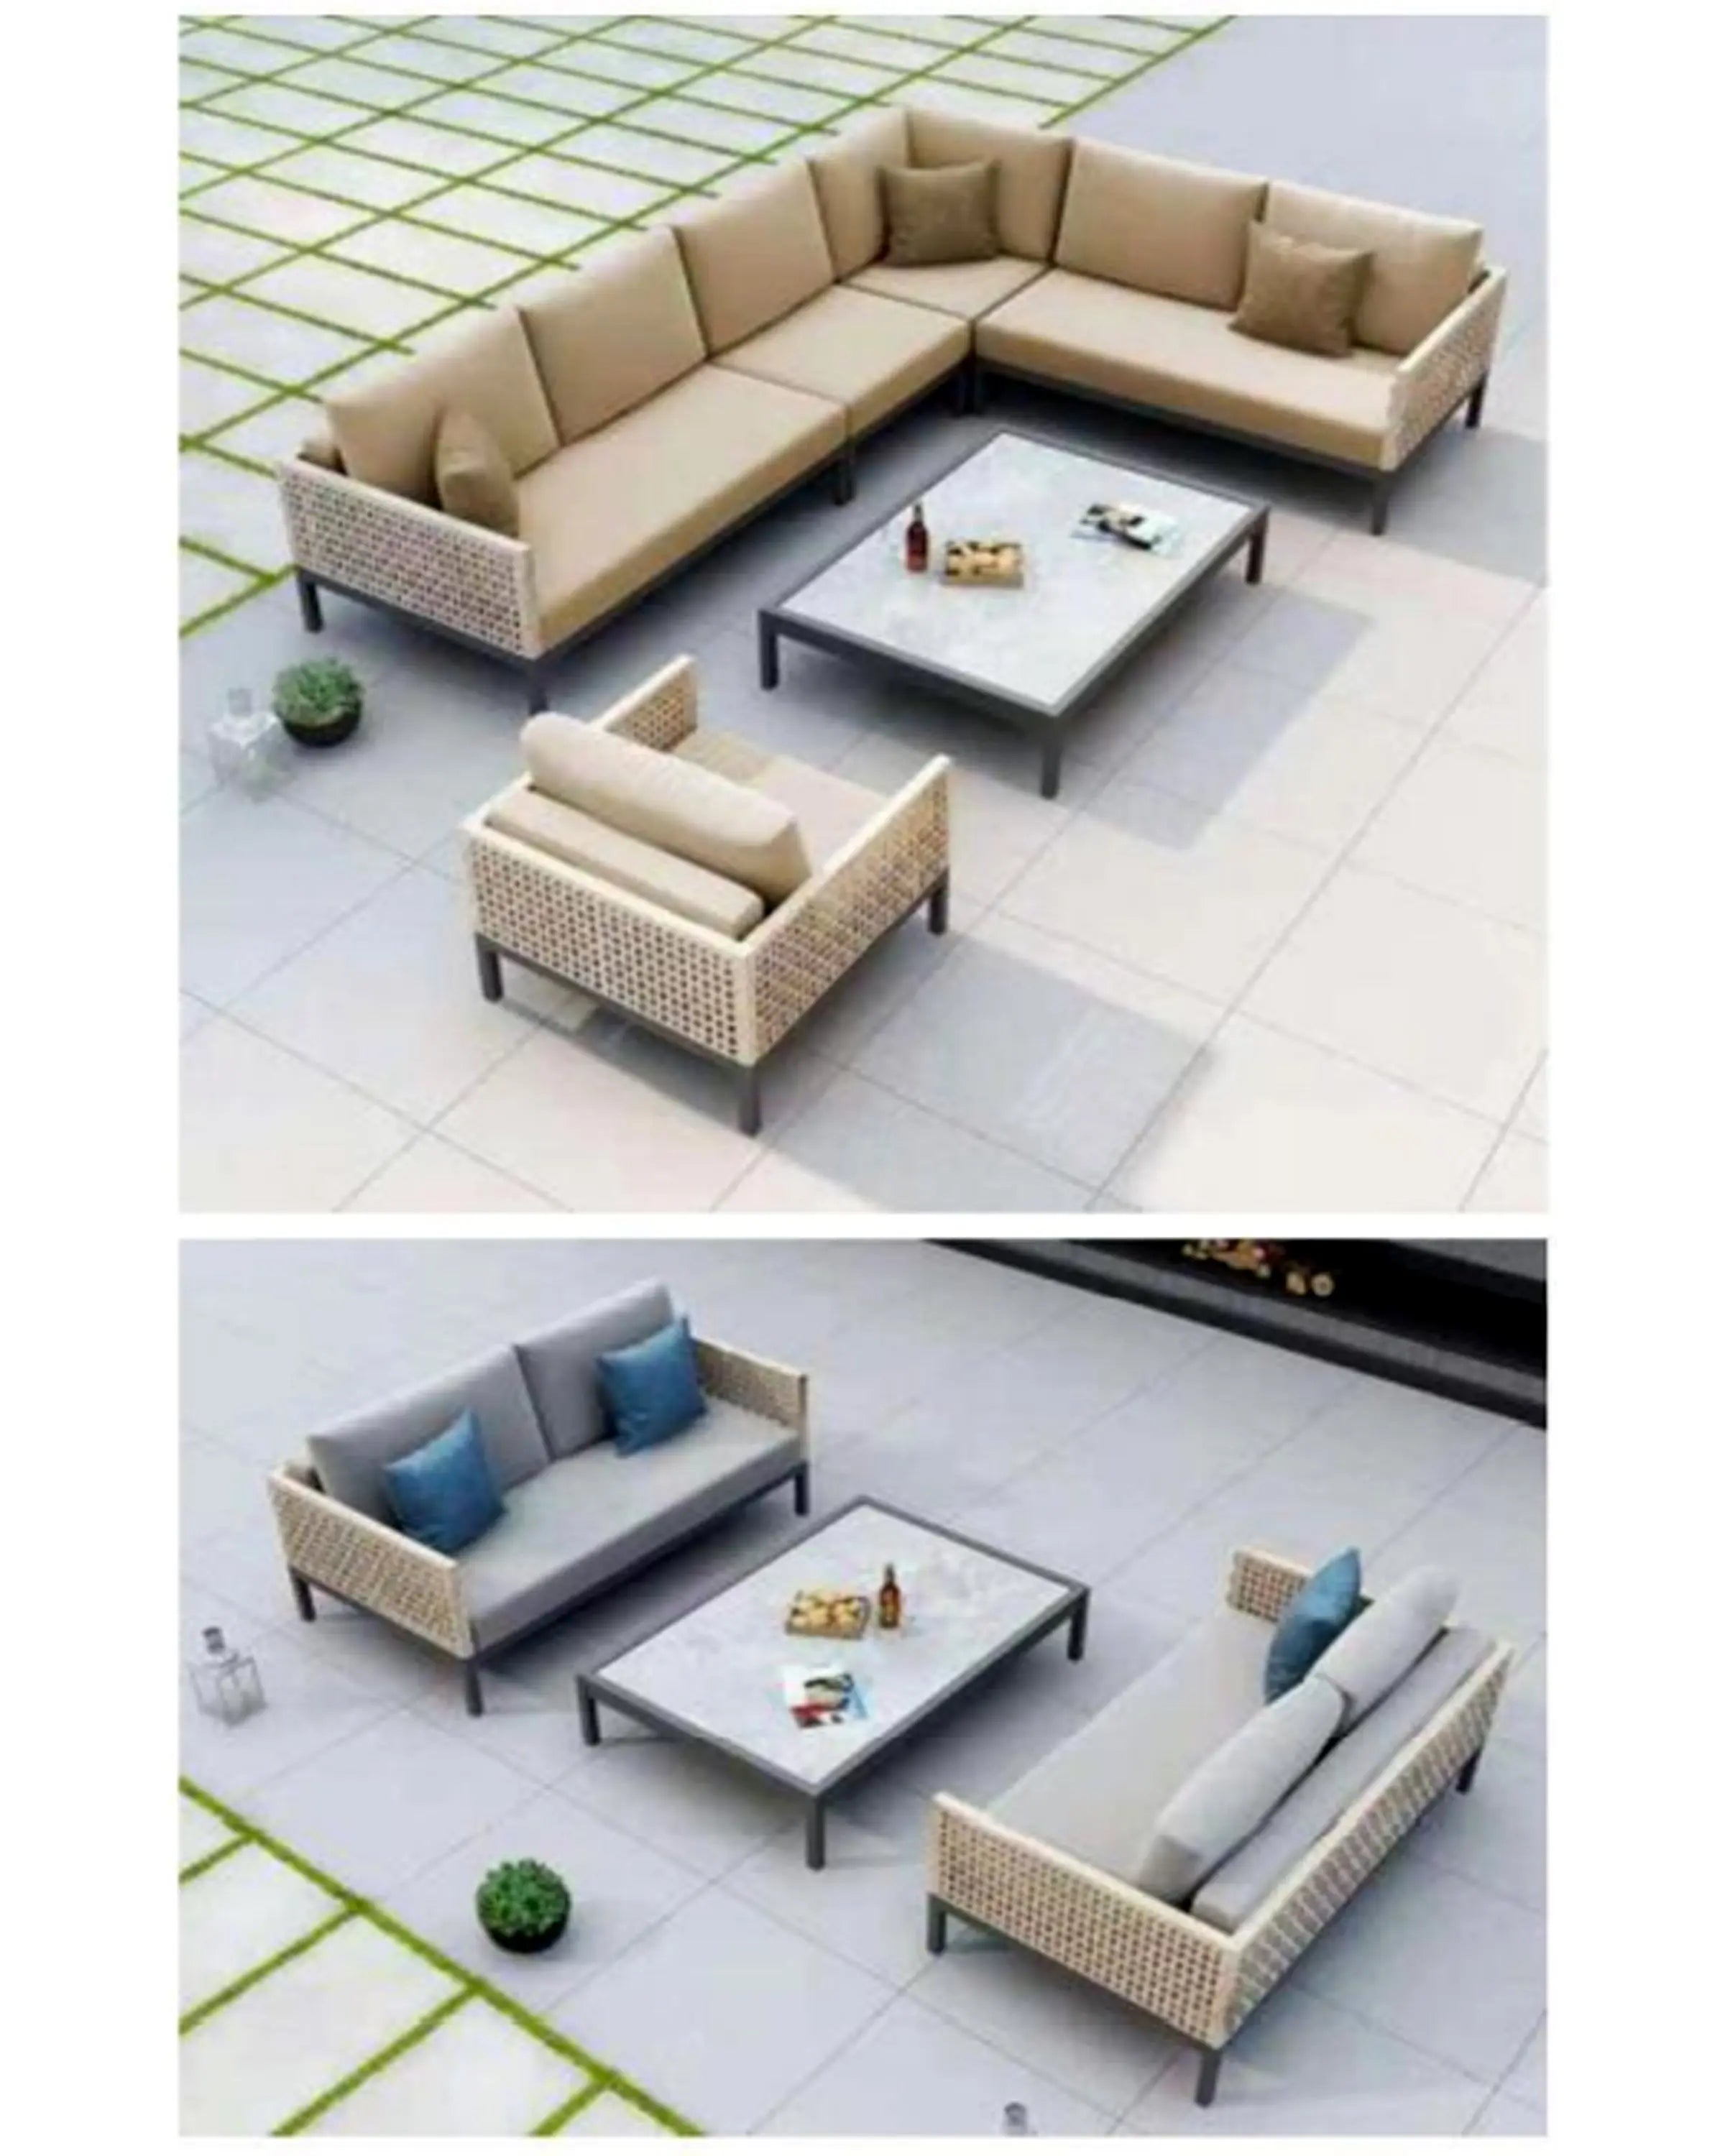 Pevrex Sofa Set - Out Door Furniture ANGIE HOMES